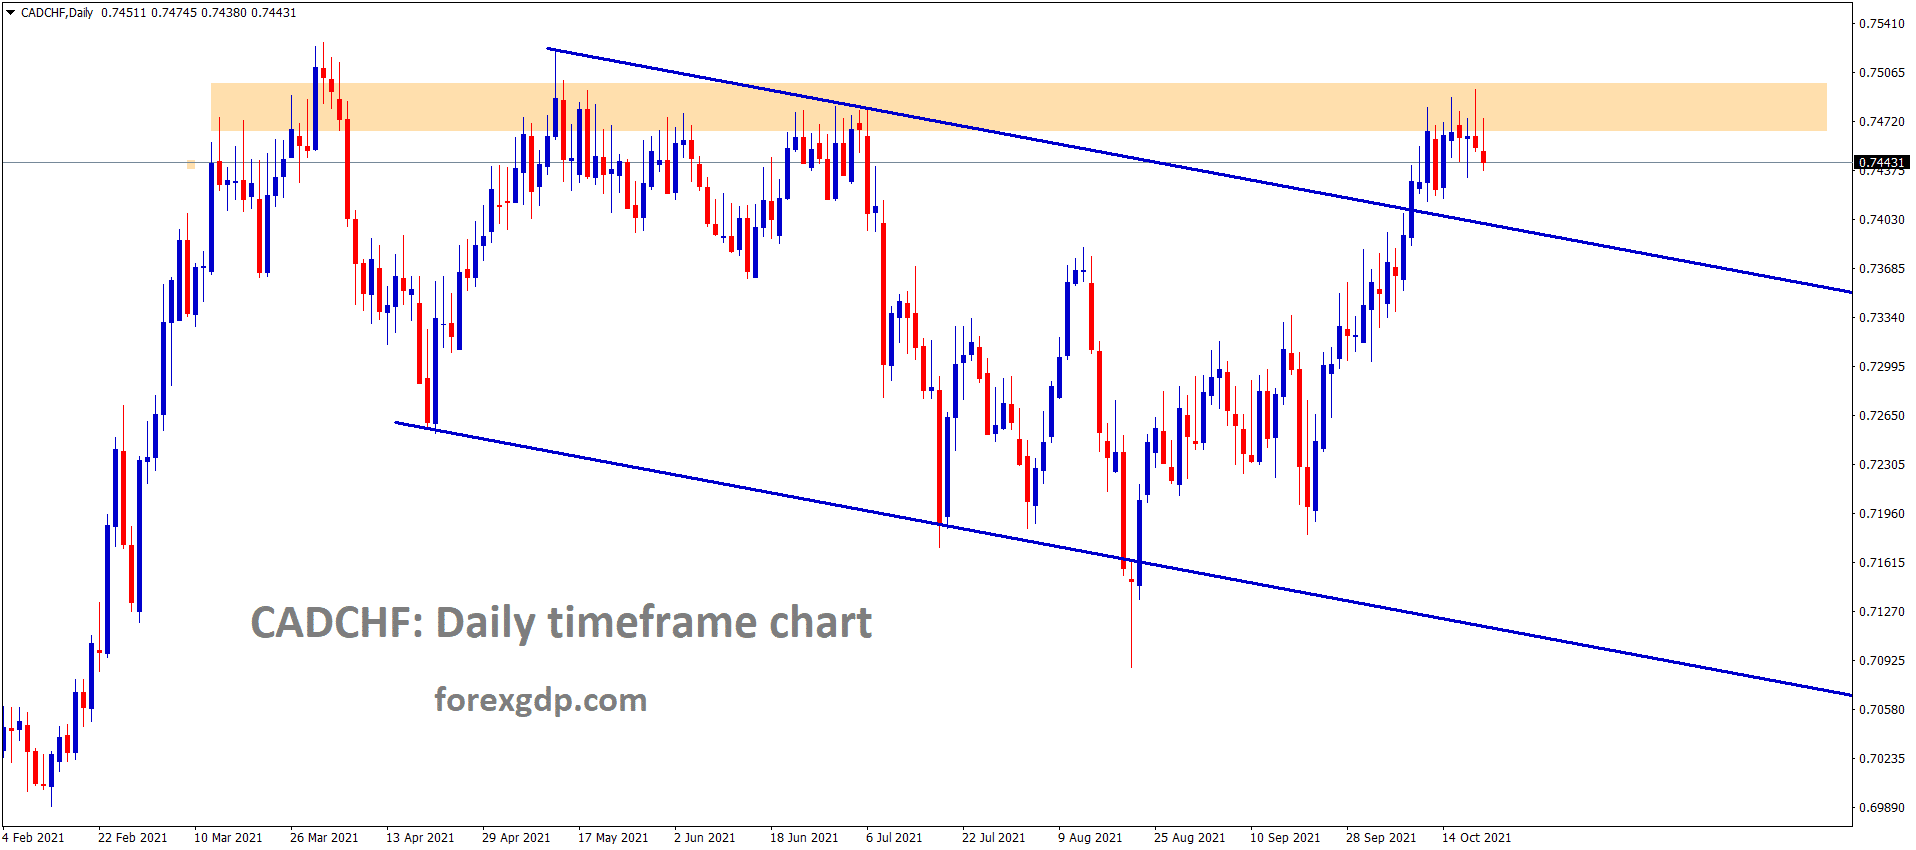 CADCHF has reached the horizontal resistance area after breaking the descending channel range